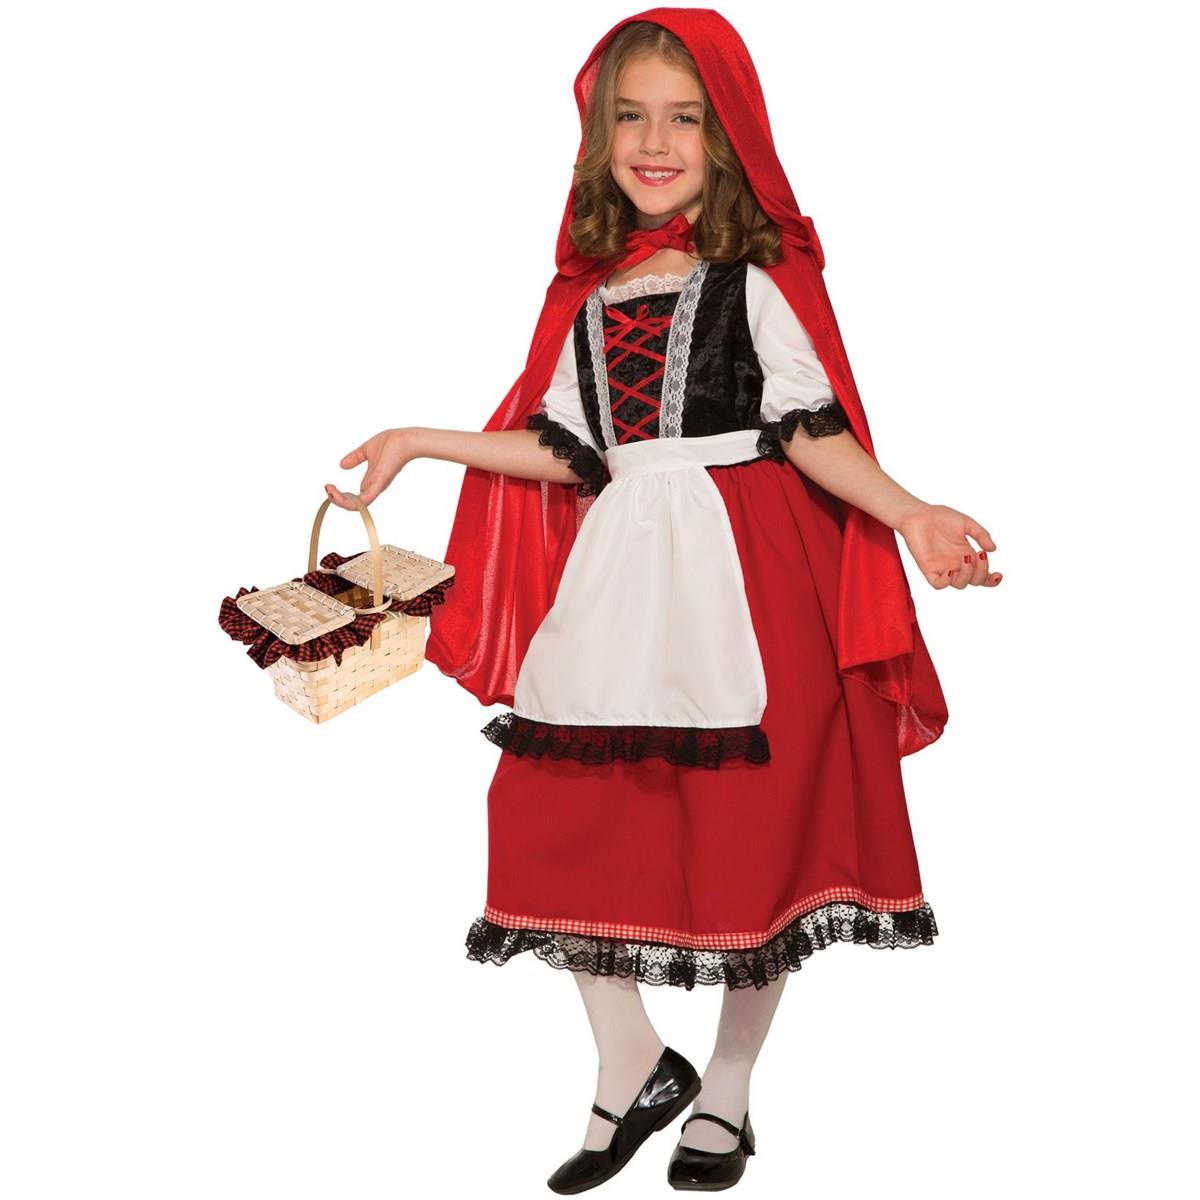 Picture of Forum Novelties 277626 Halloween Girls Deluxe Red Riding Hood Costume - Small